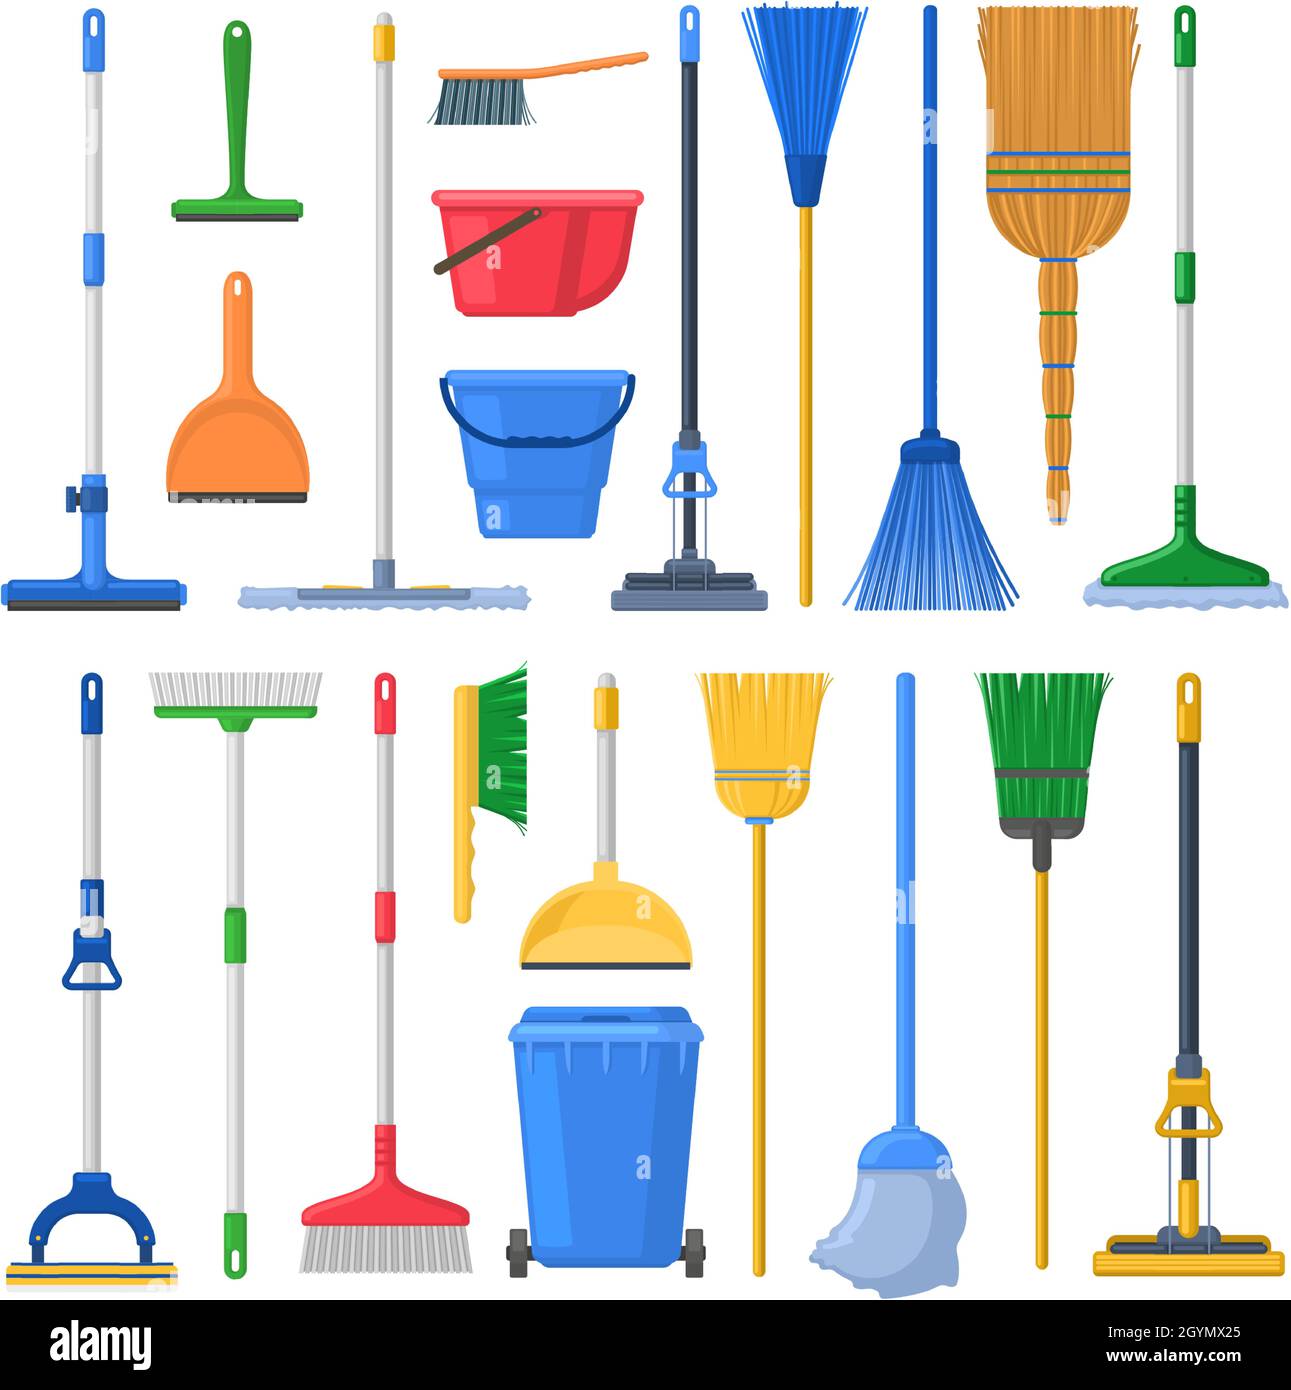 Household cleaning mops, broom, sweeps, scoops and plastic buckets. Cleaning swab, mop, broom, feather duster and dustpan vector Illustration set Stock Vector